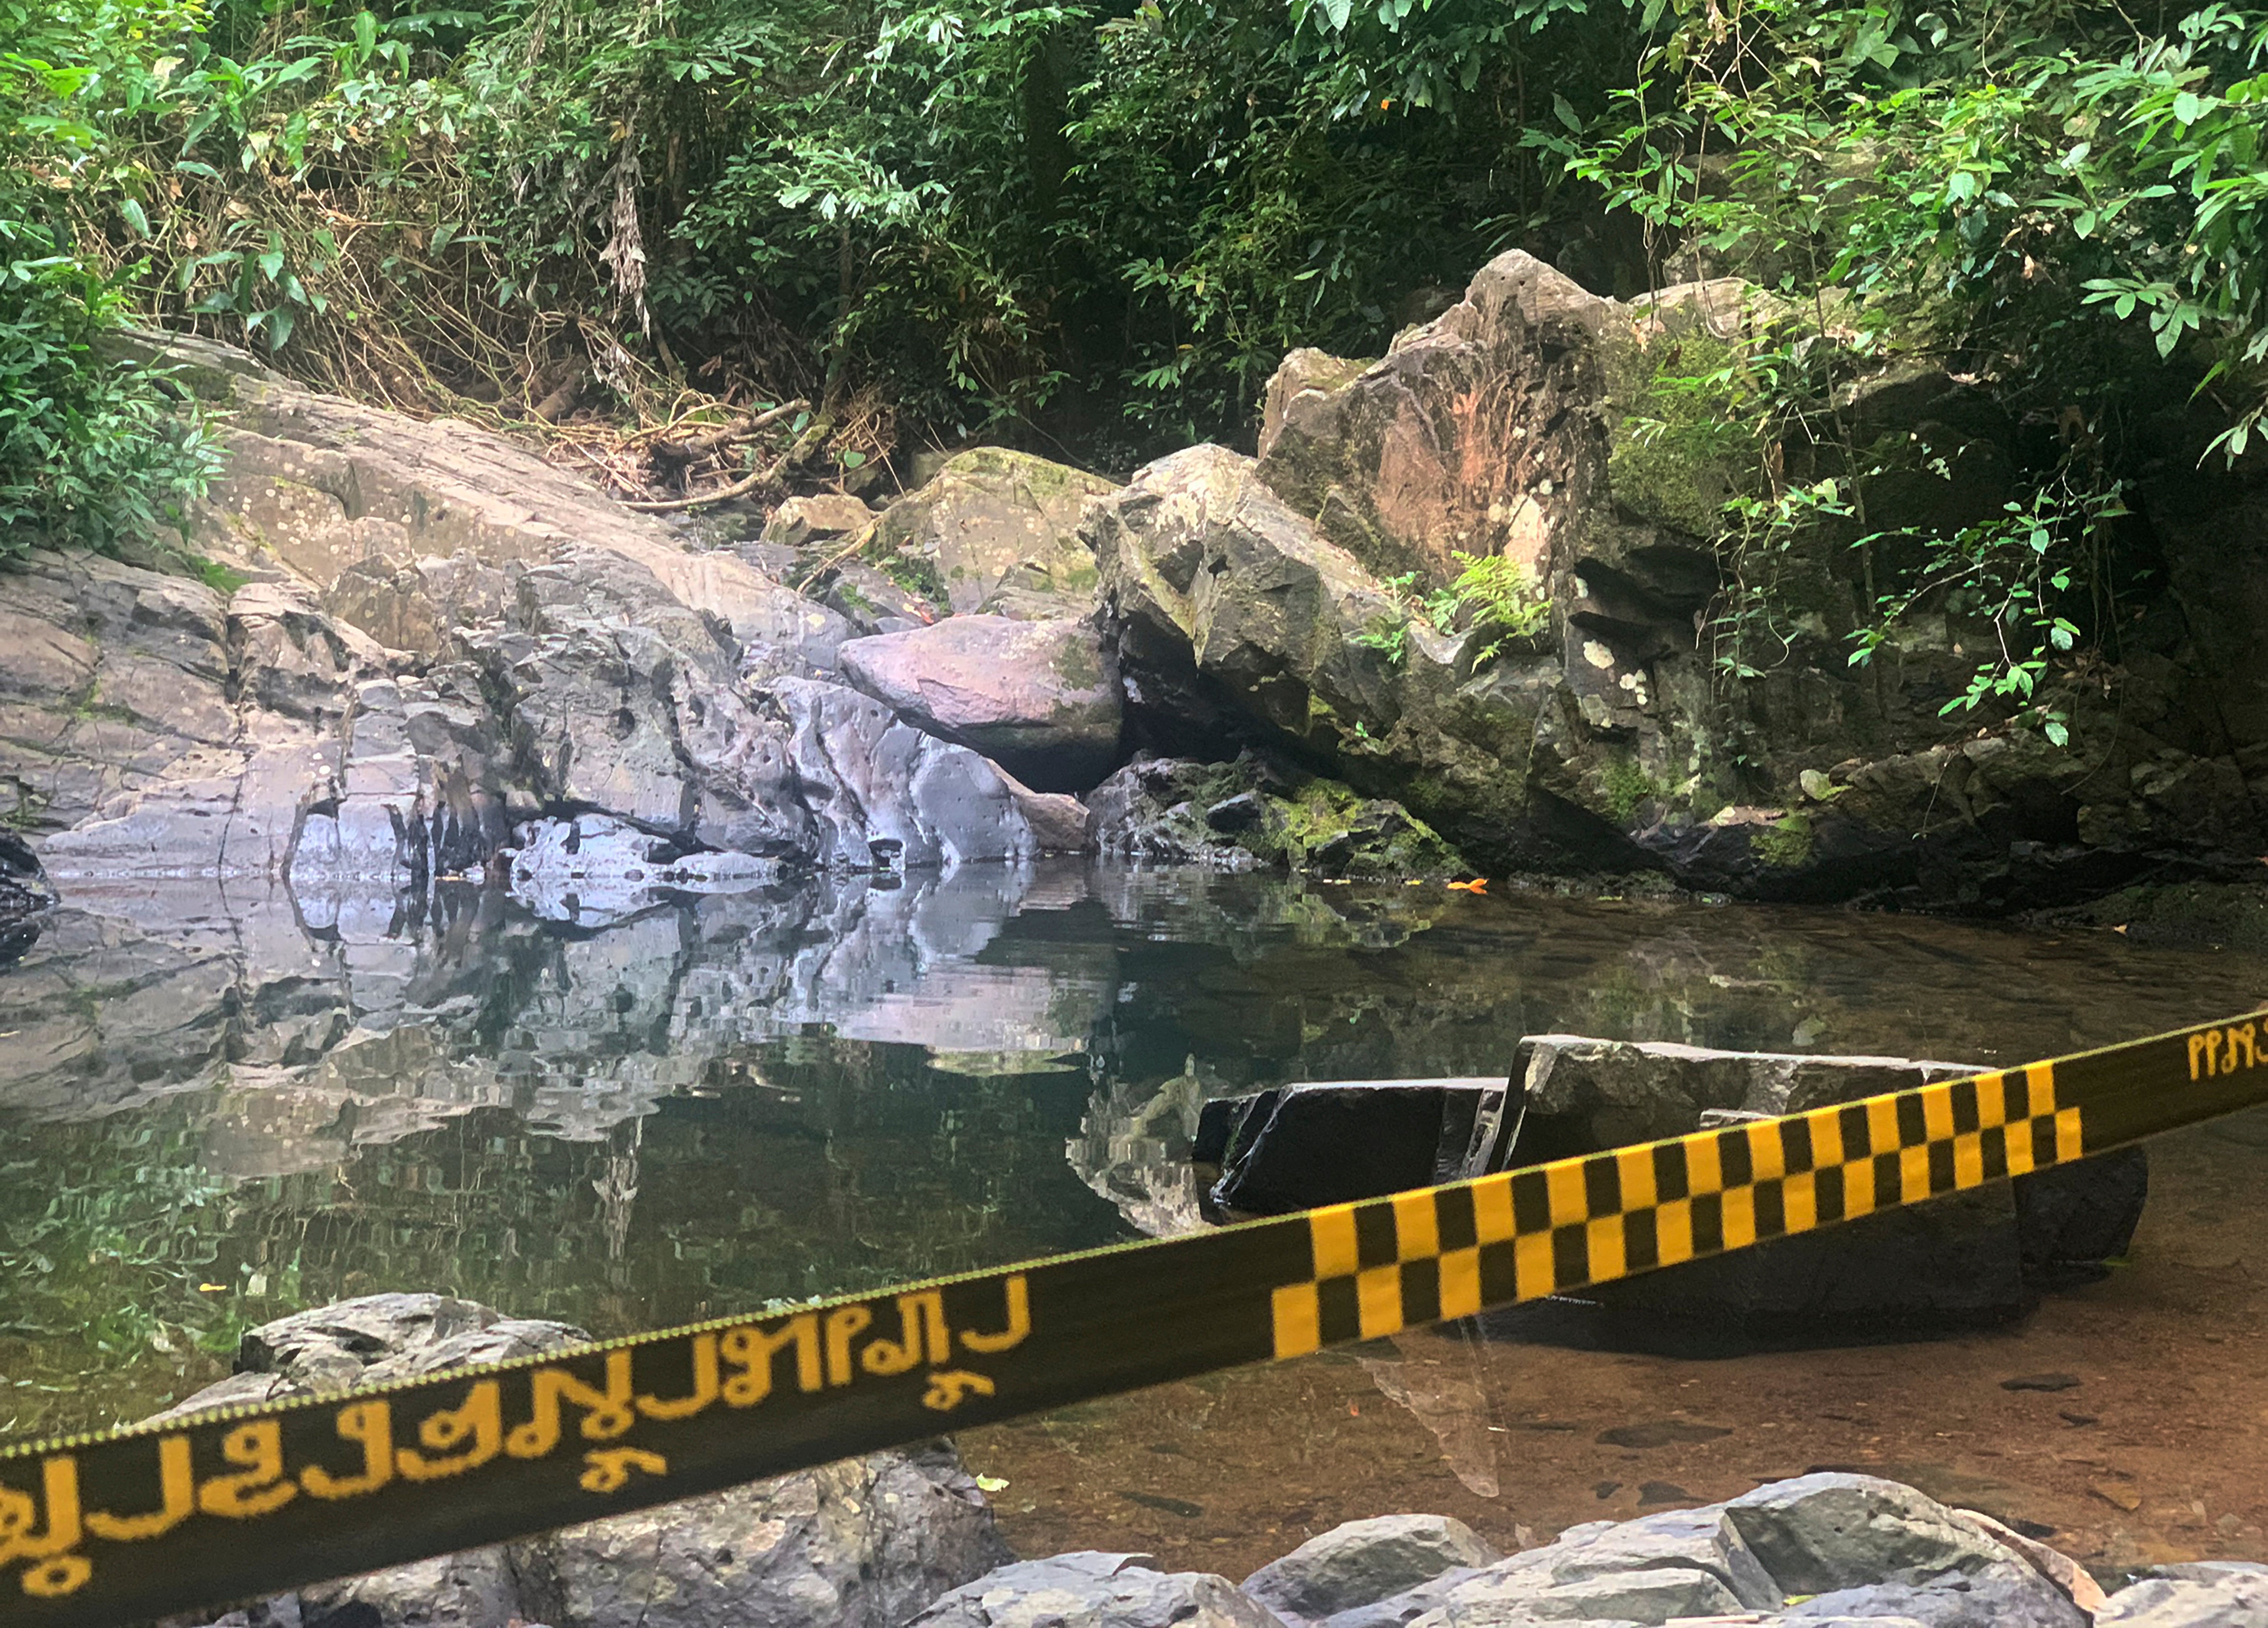 A police tape cordons off the area where a woman was found dead at a secluded spot on the island of Phuket